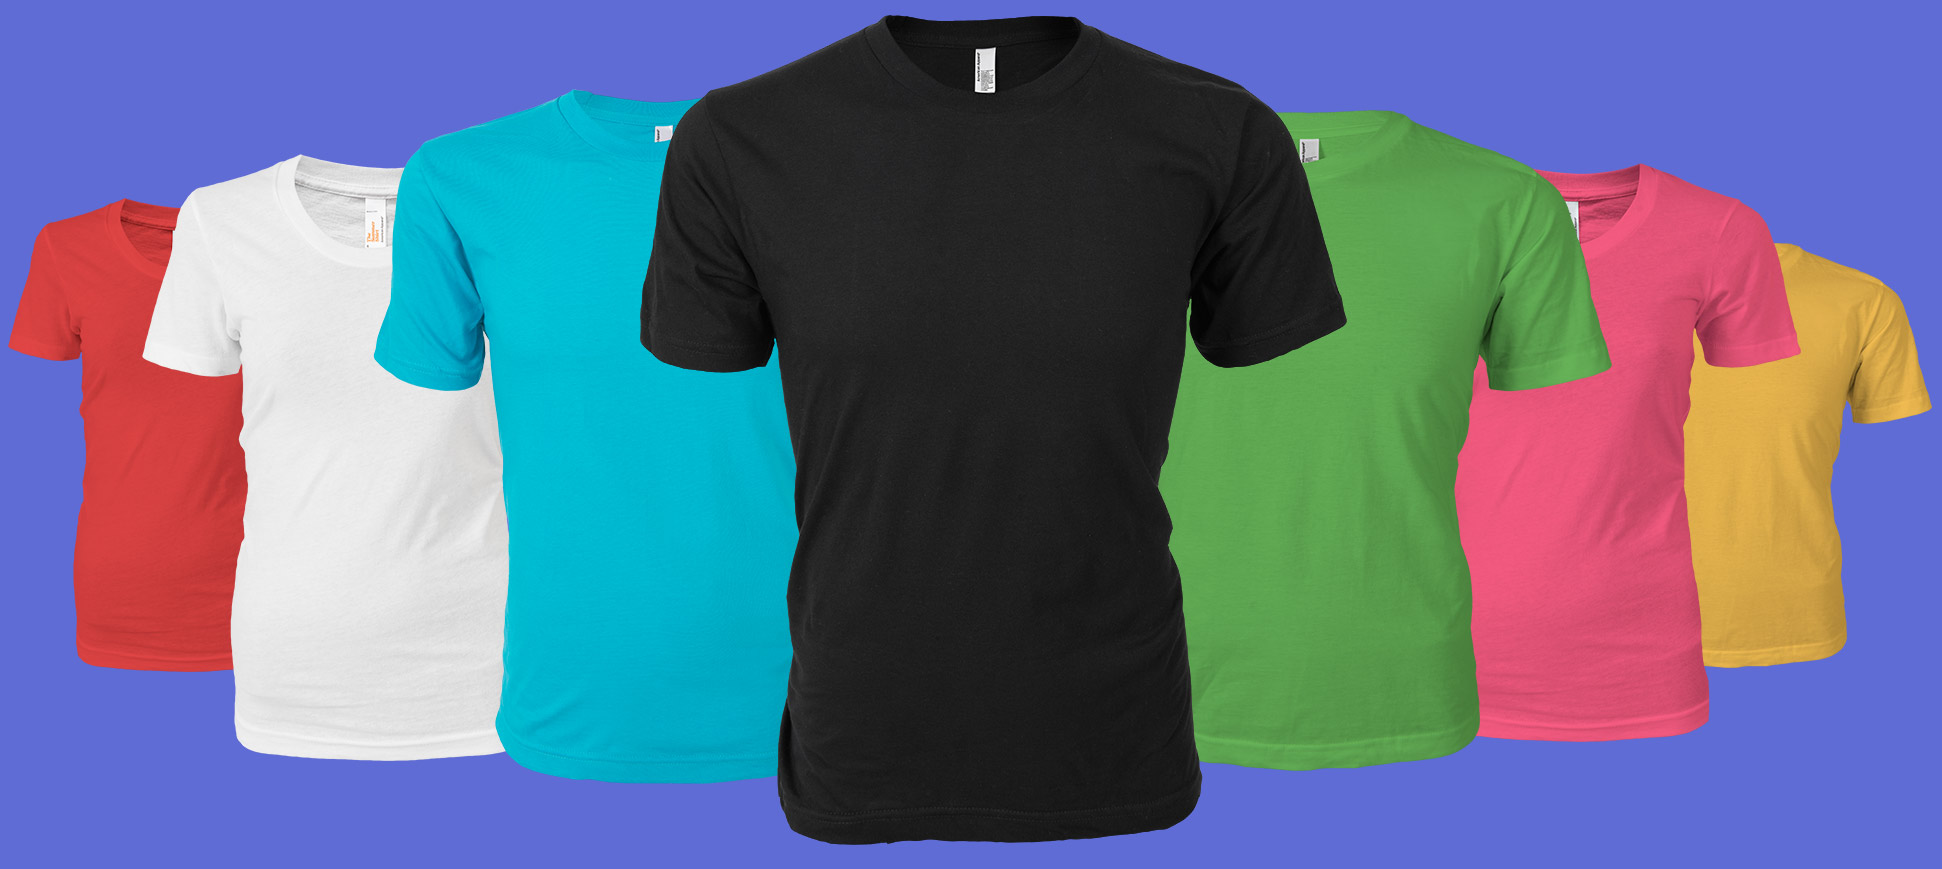 Create an awesome t-shirt with a personalized design (Kids, Men, Women)